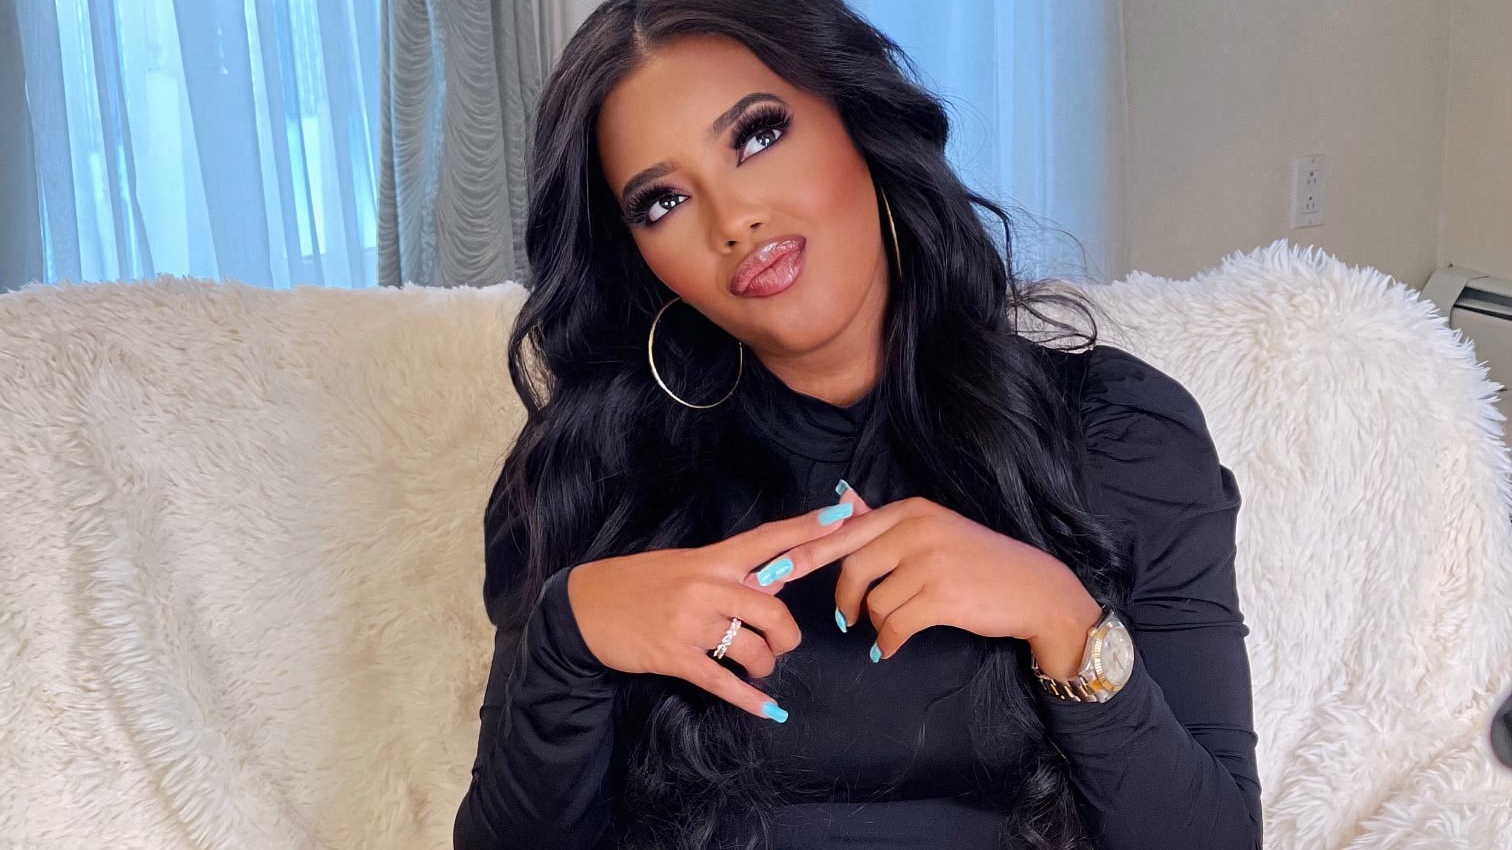 She’s ‘Just Angela’: Angela Simmons On Her New Reality Show